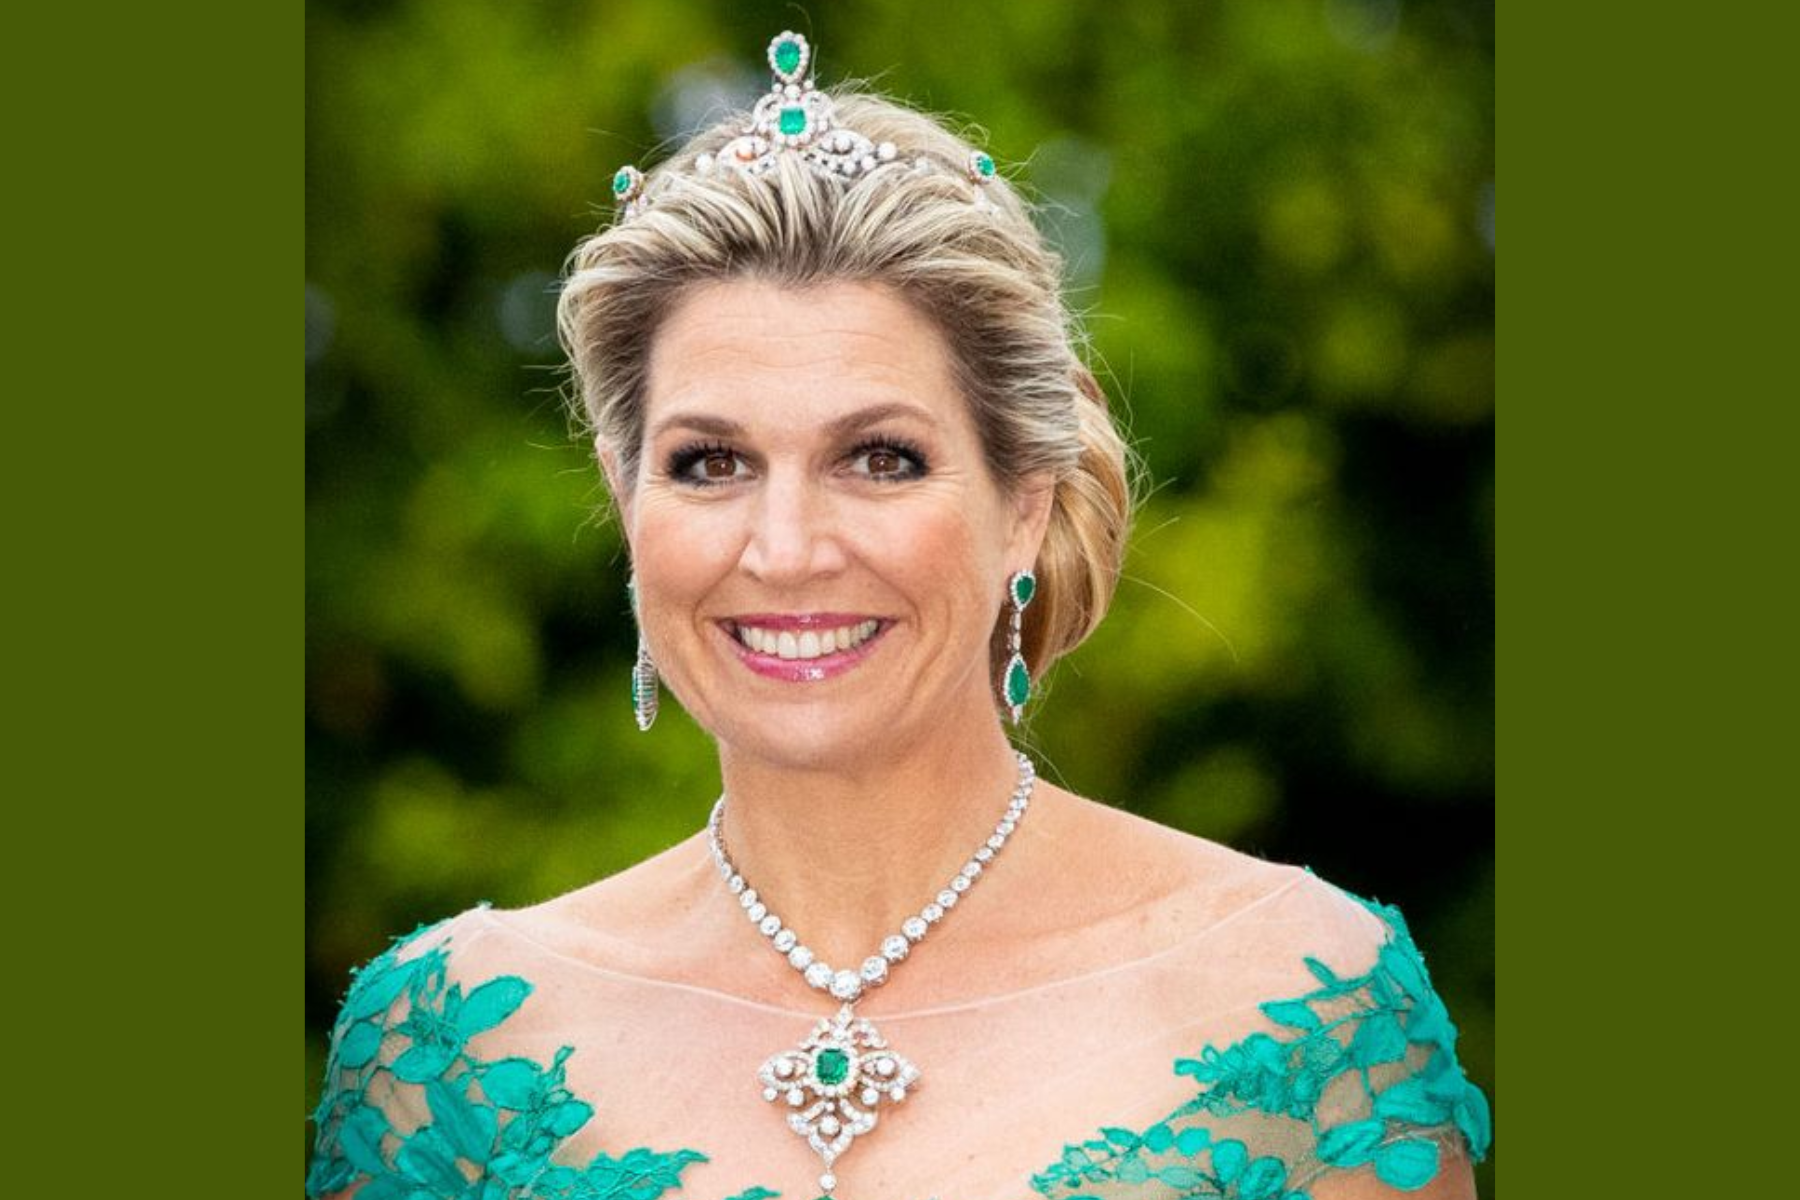 The emerald tiara, earrings, and necklace worn by Queen Maxima